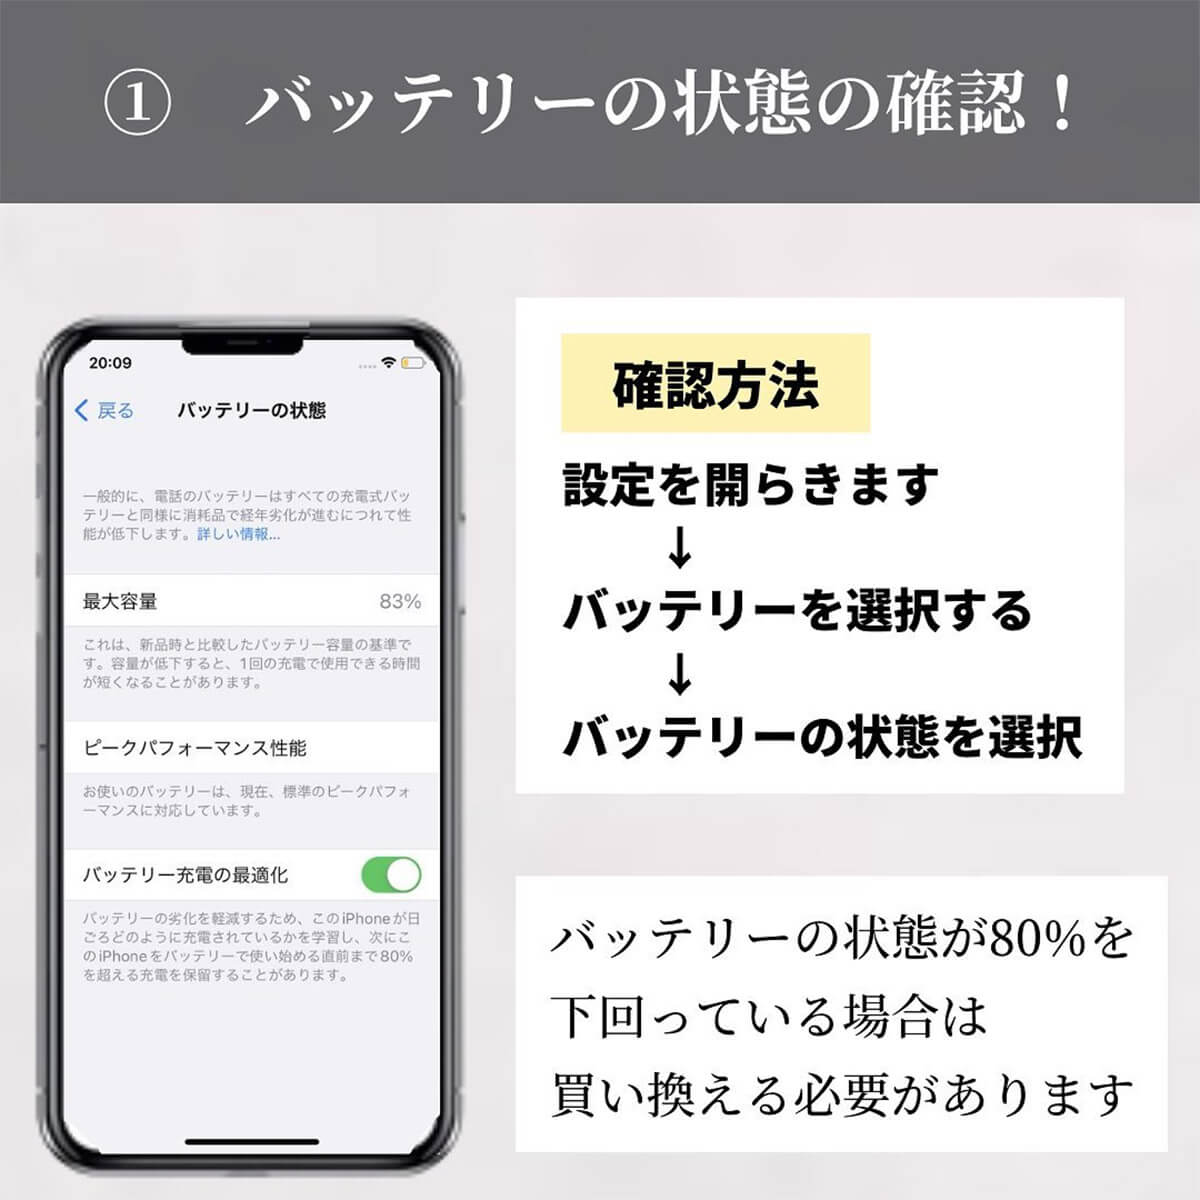 iPhoneの買い替え時を確認する方法1